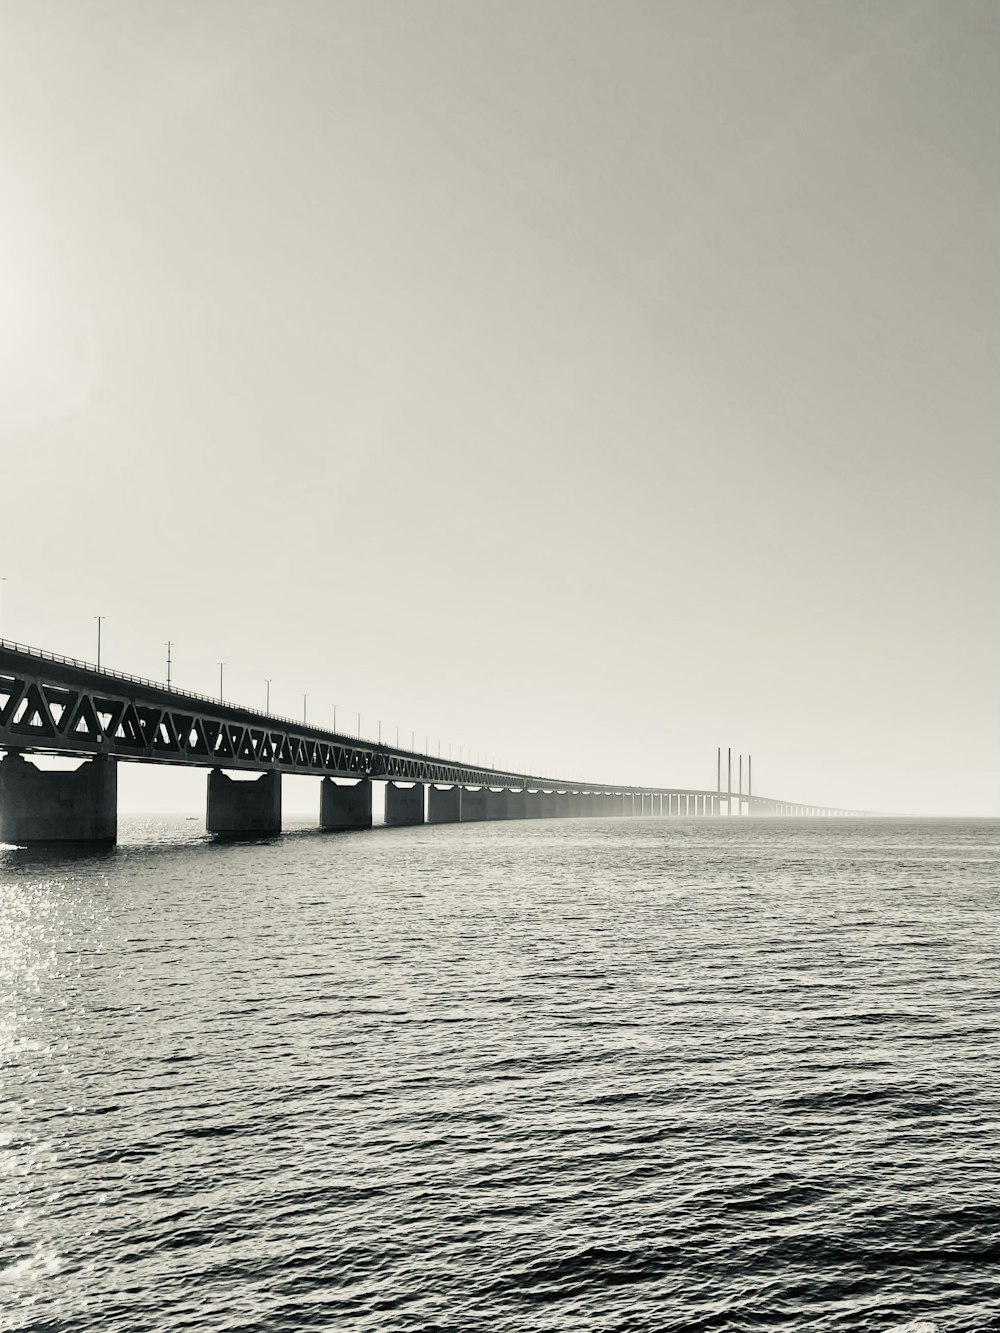 a long bridge over a large body of water